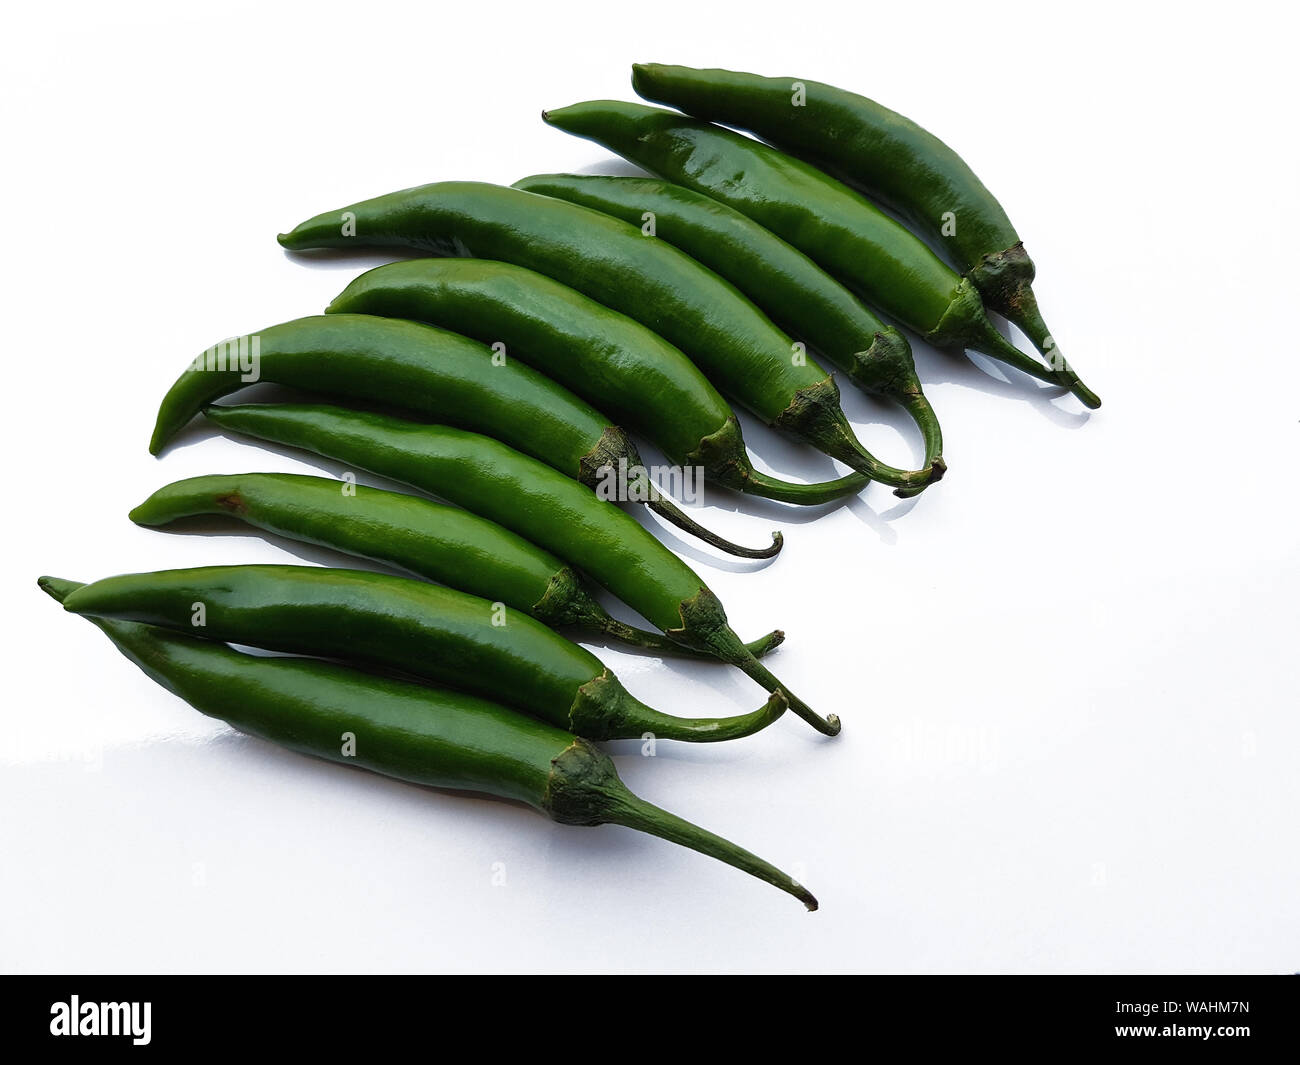 Fresh green chili cultivated organic from Pakistan Stock Photo - Alamy